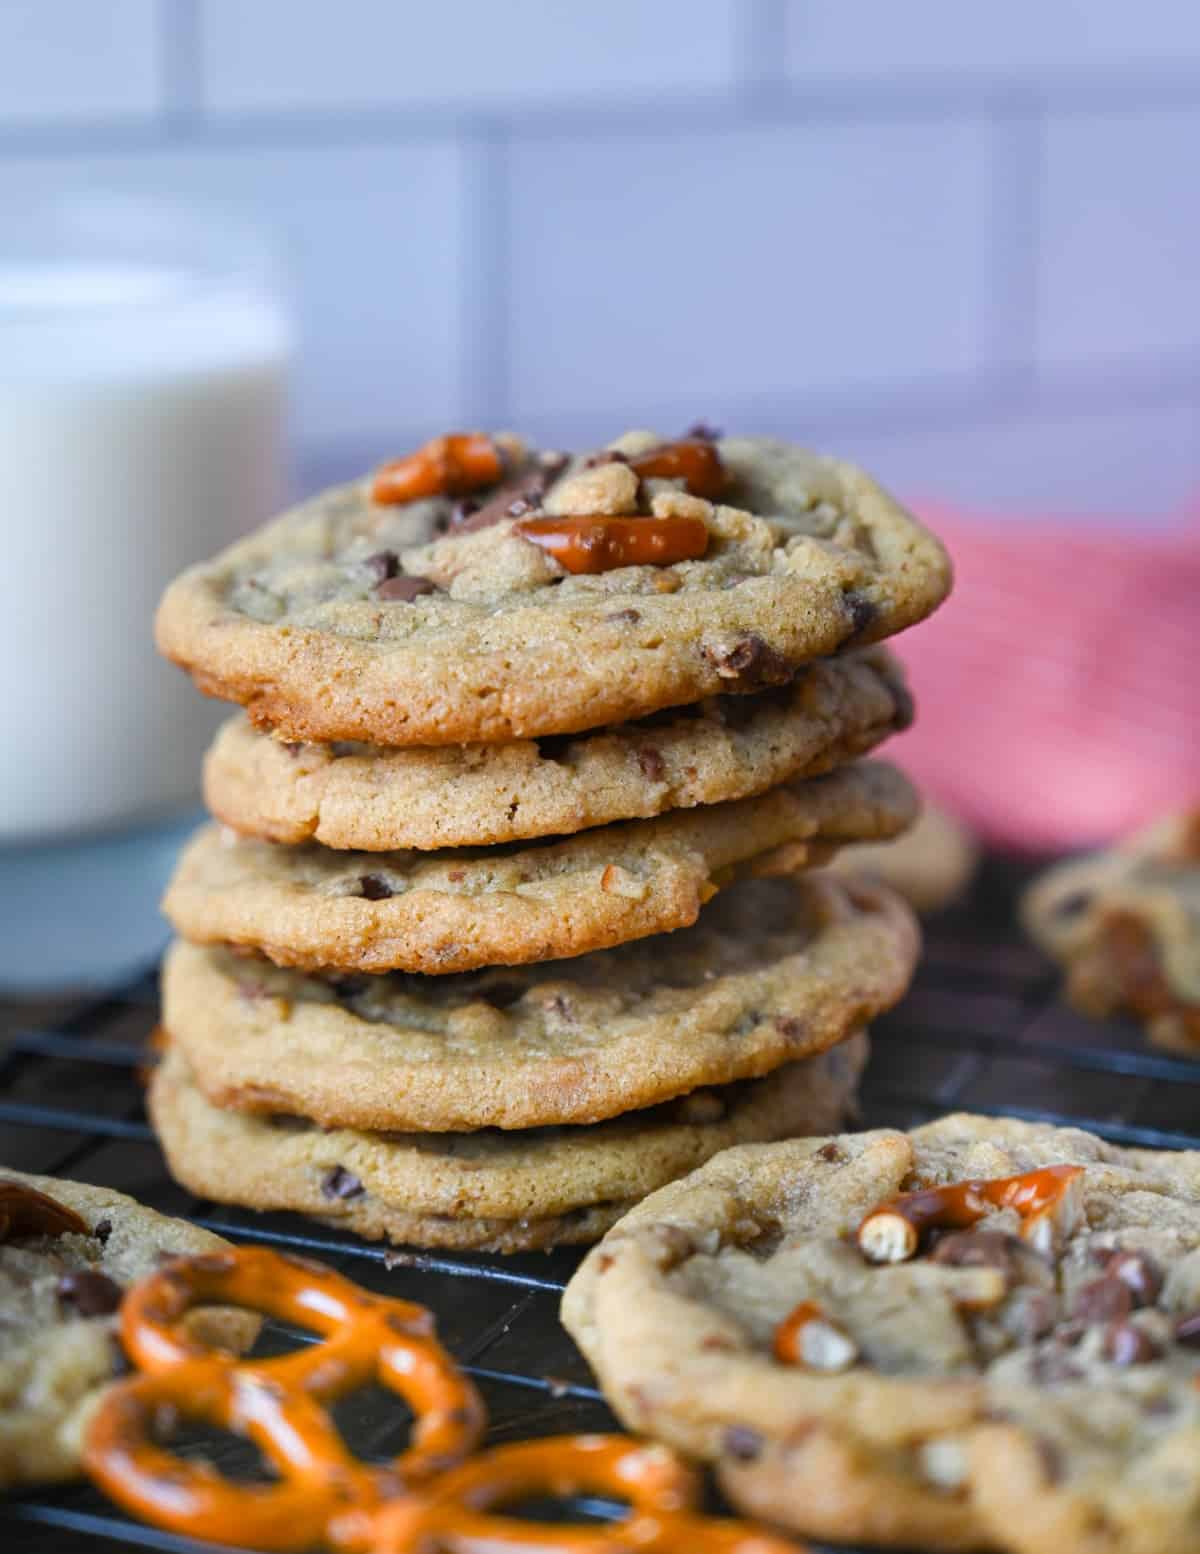 A close-up of a stack of cookies.